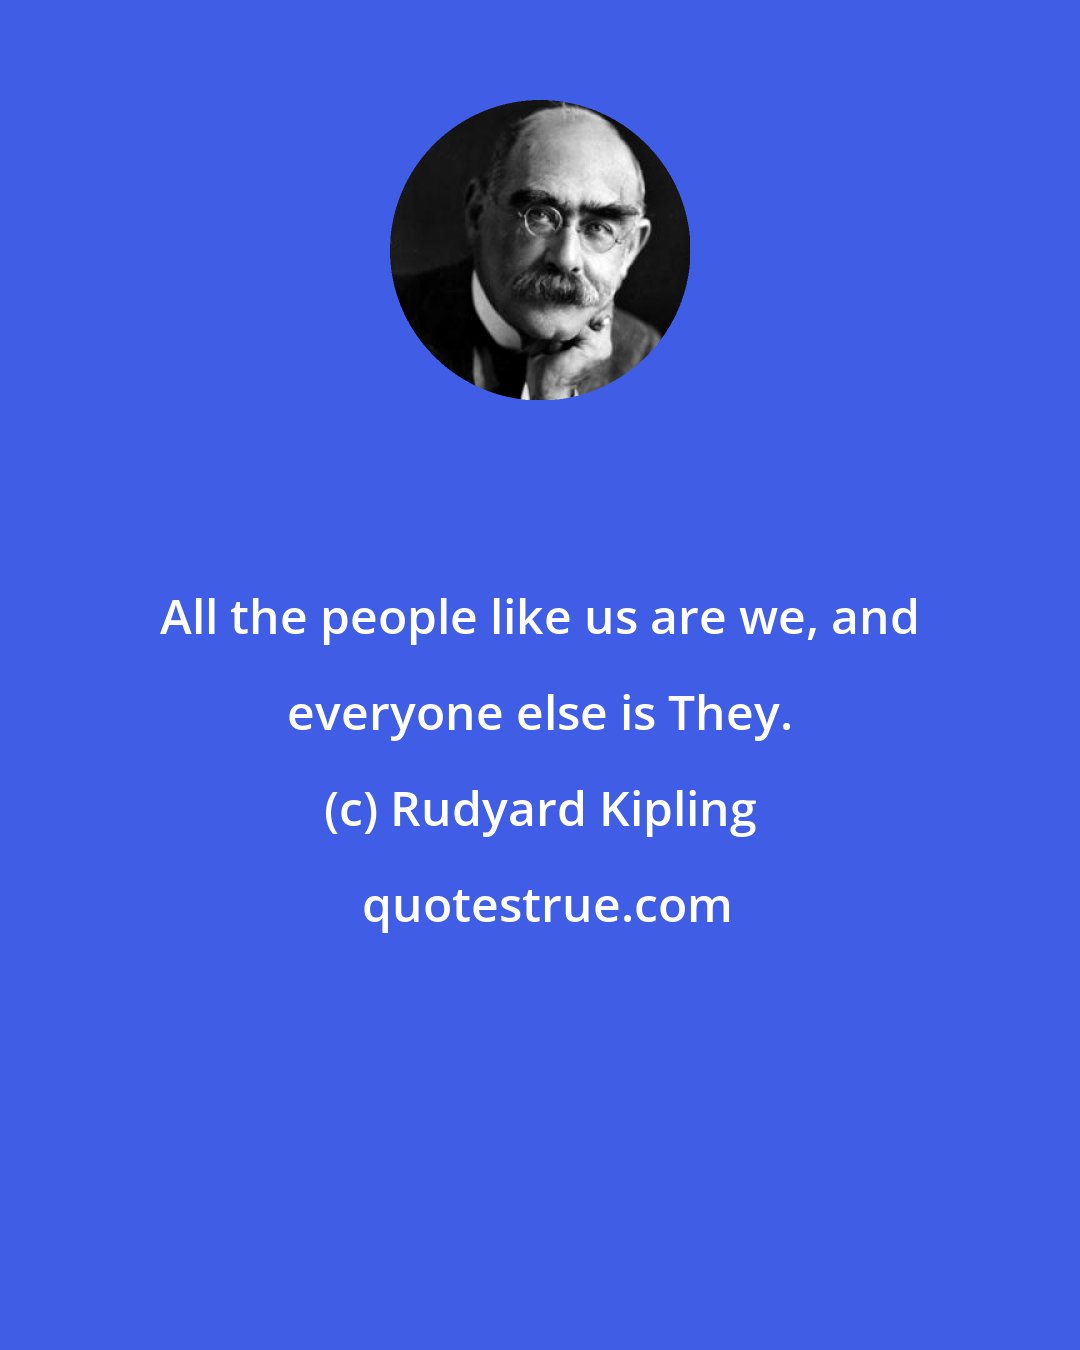 Rudyard Kipling: All the people like us are we, and everyone else is They.